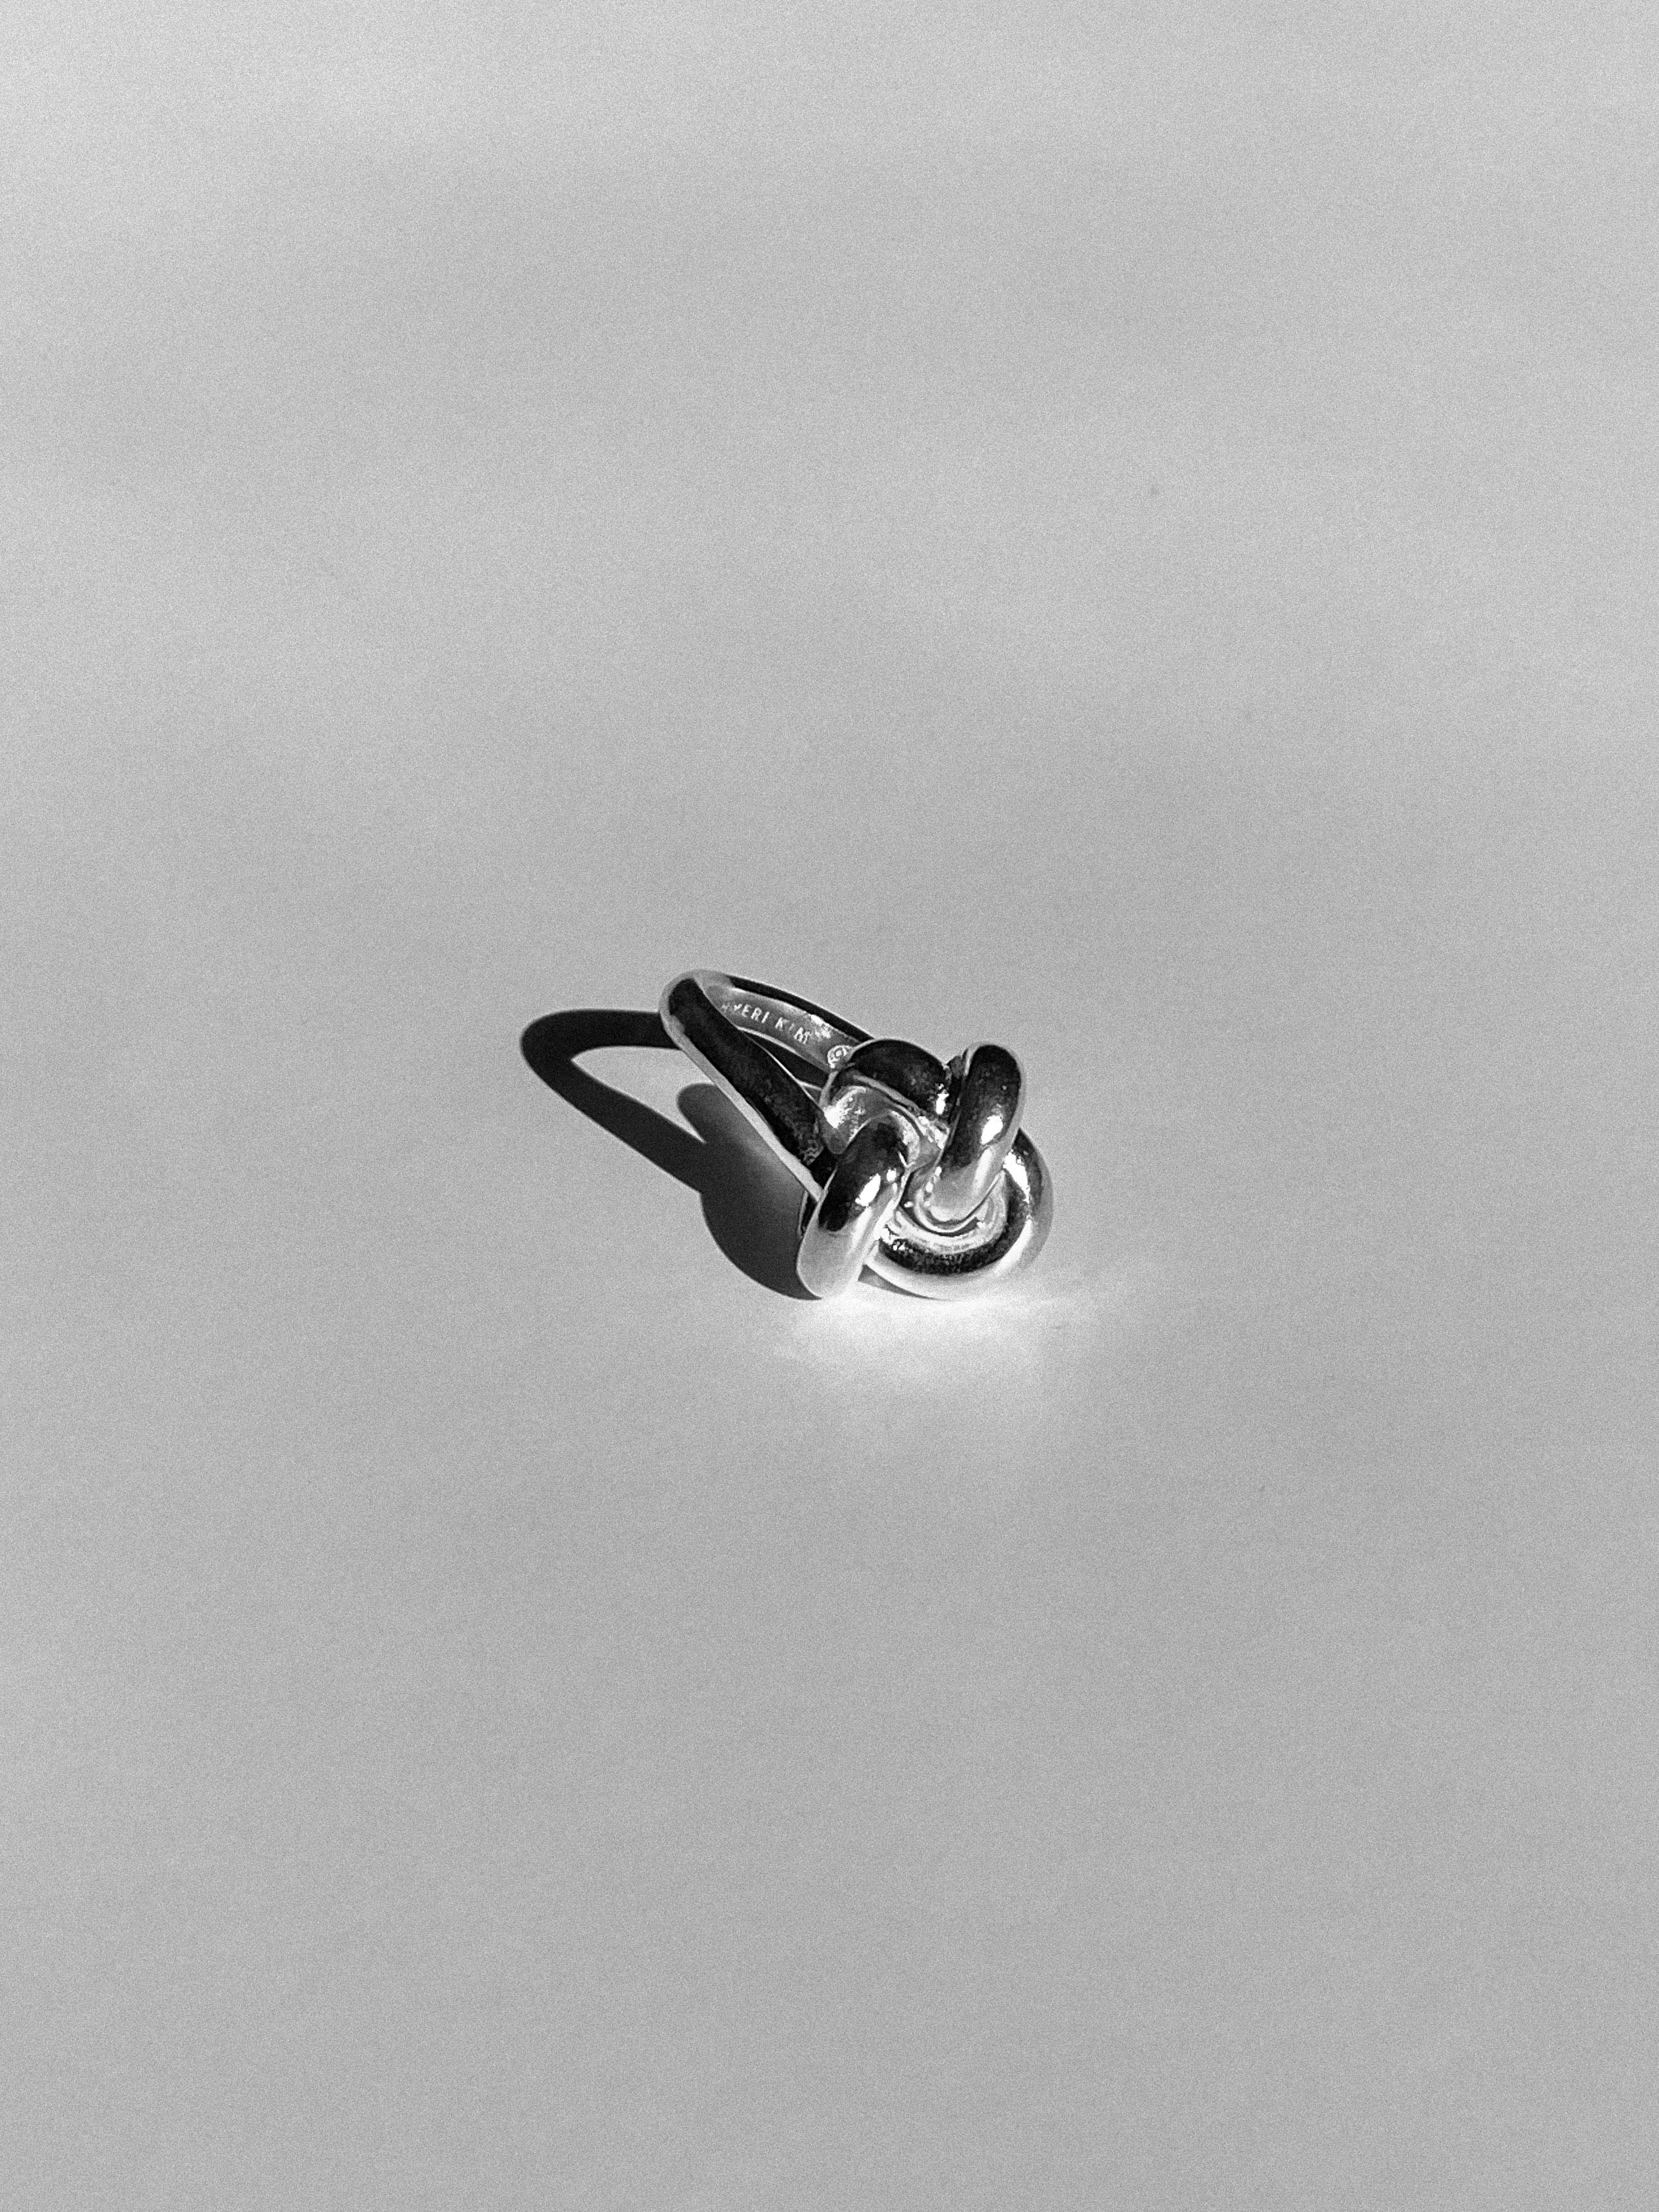 Knot ring 13.6g